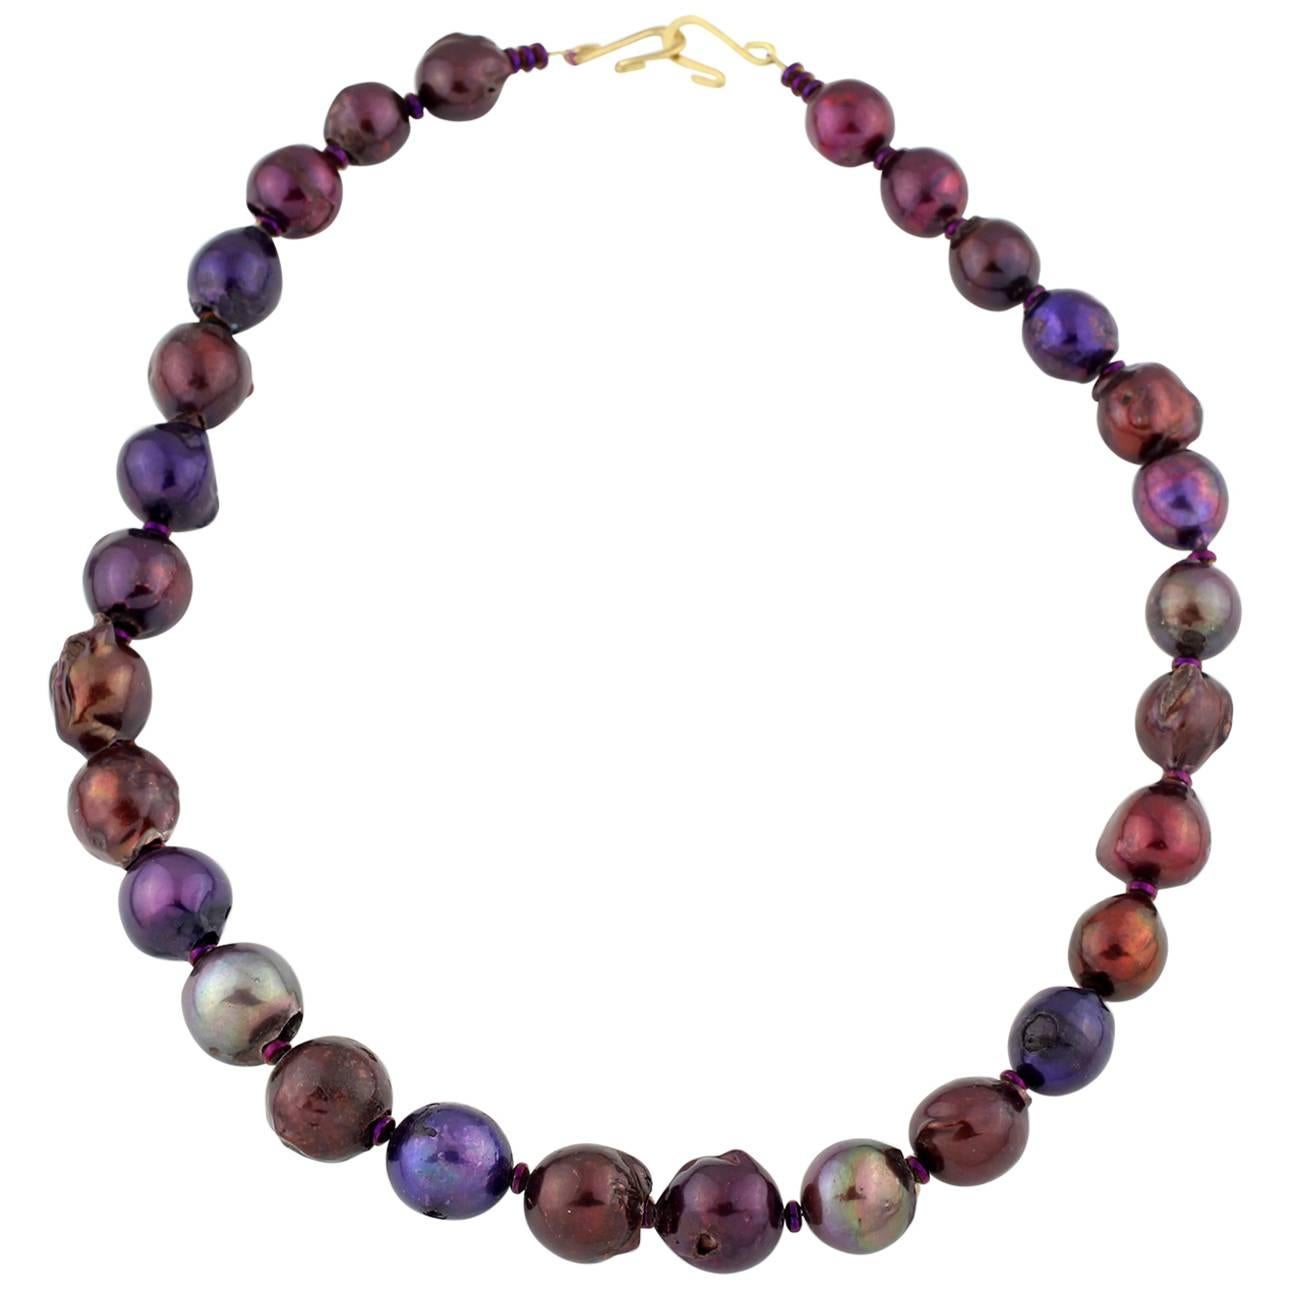 Rainbow of Pearls Necklace